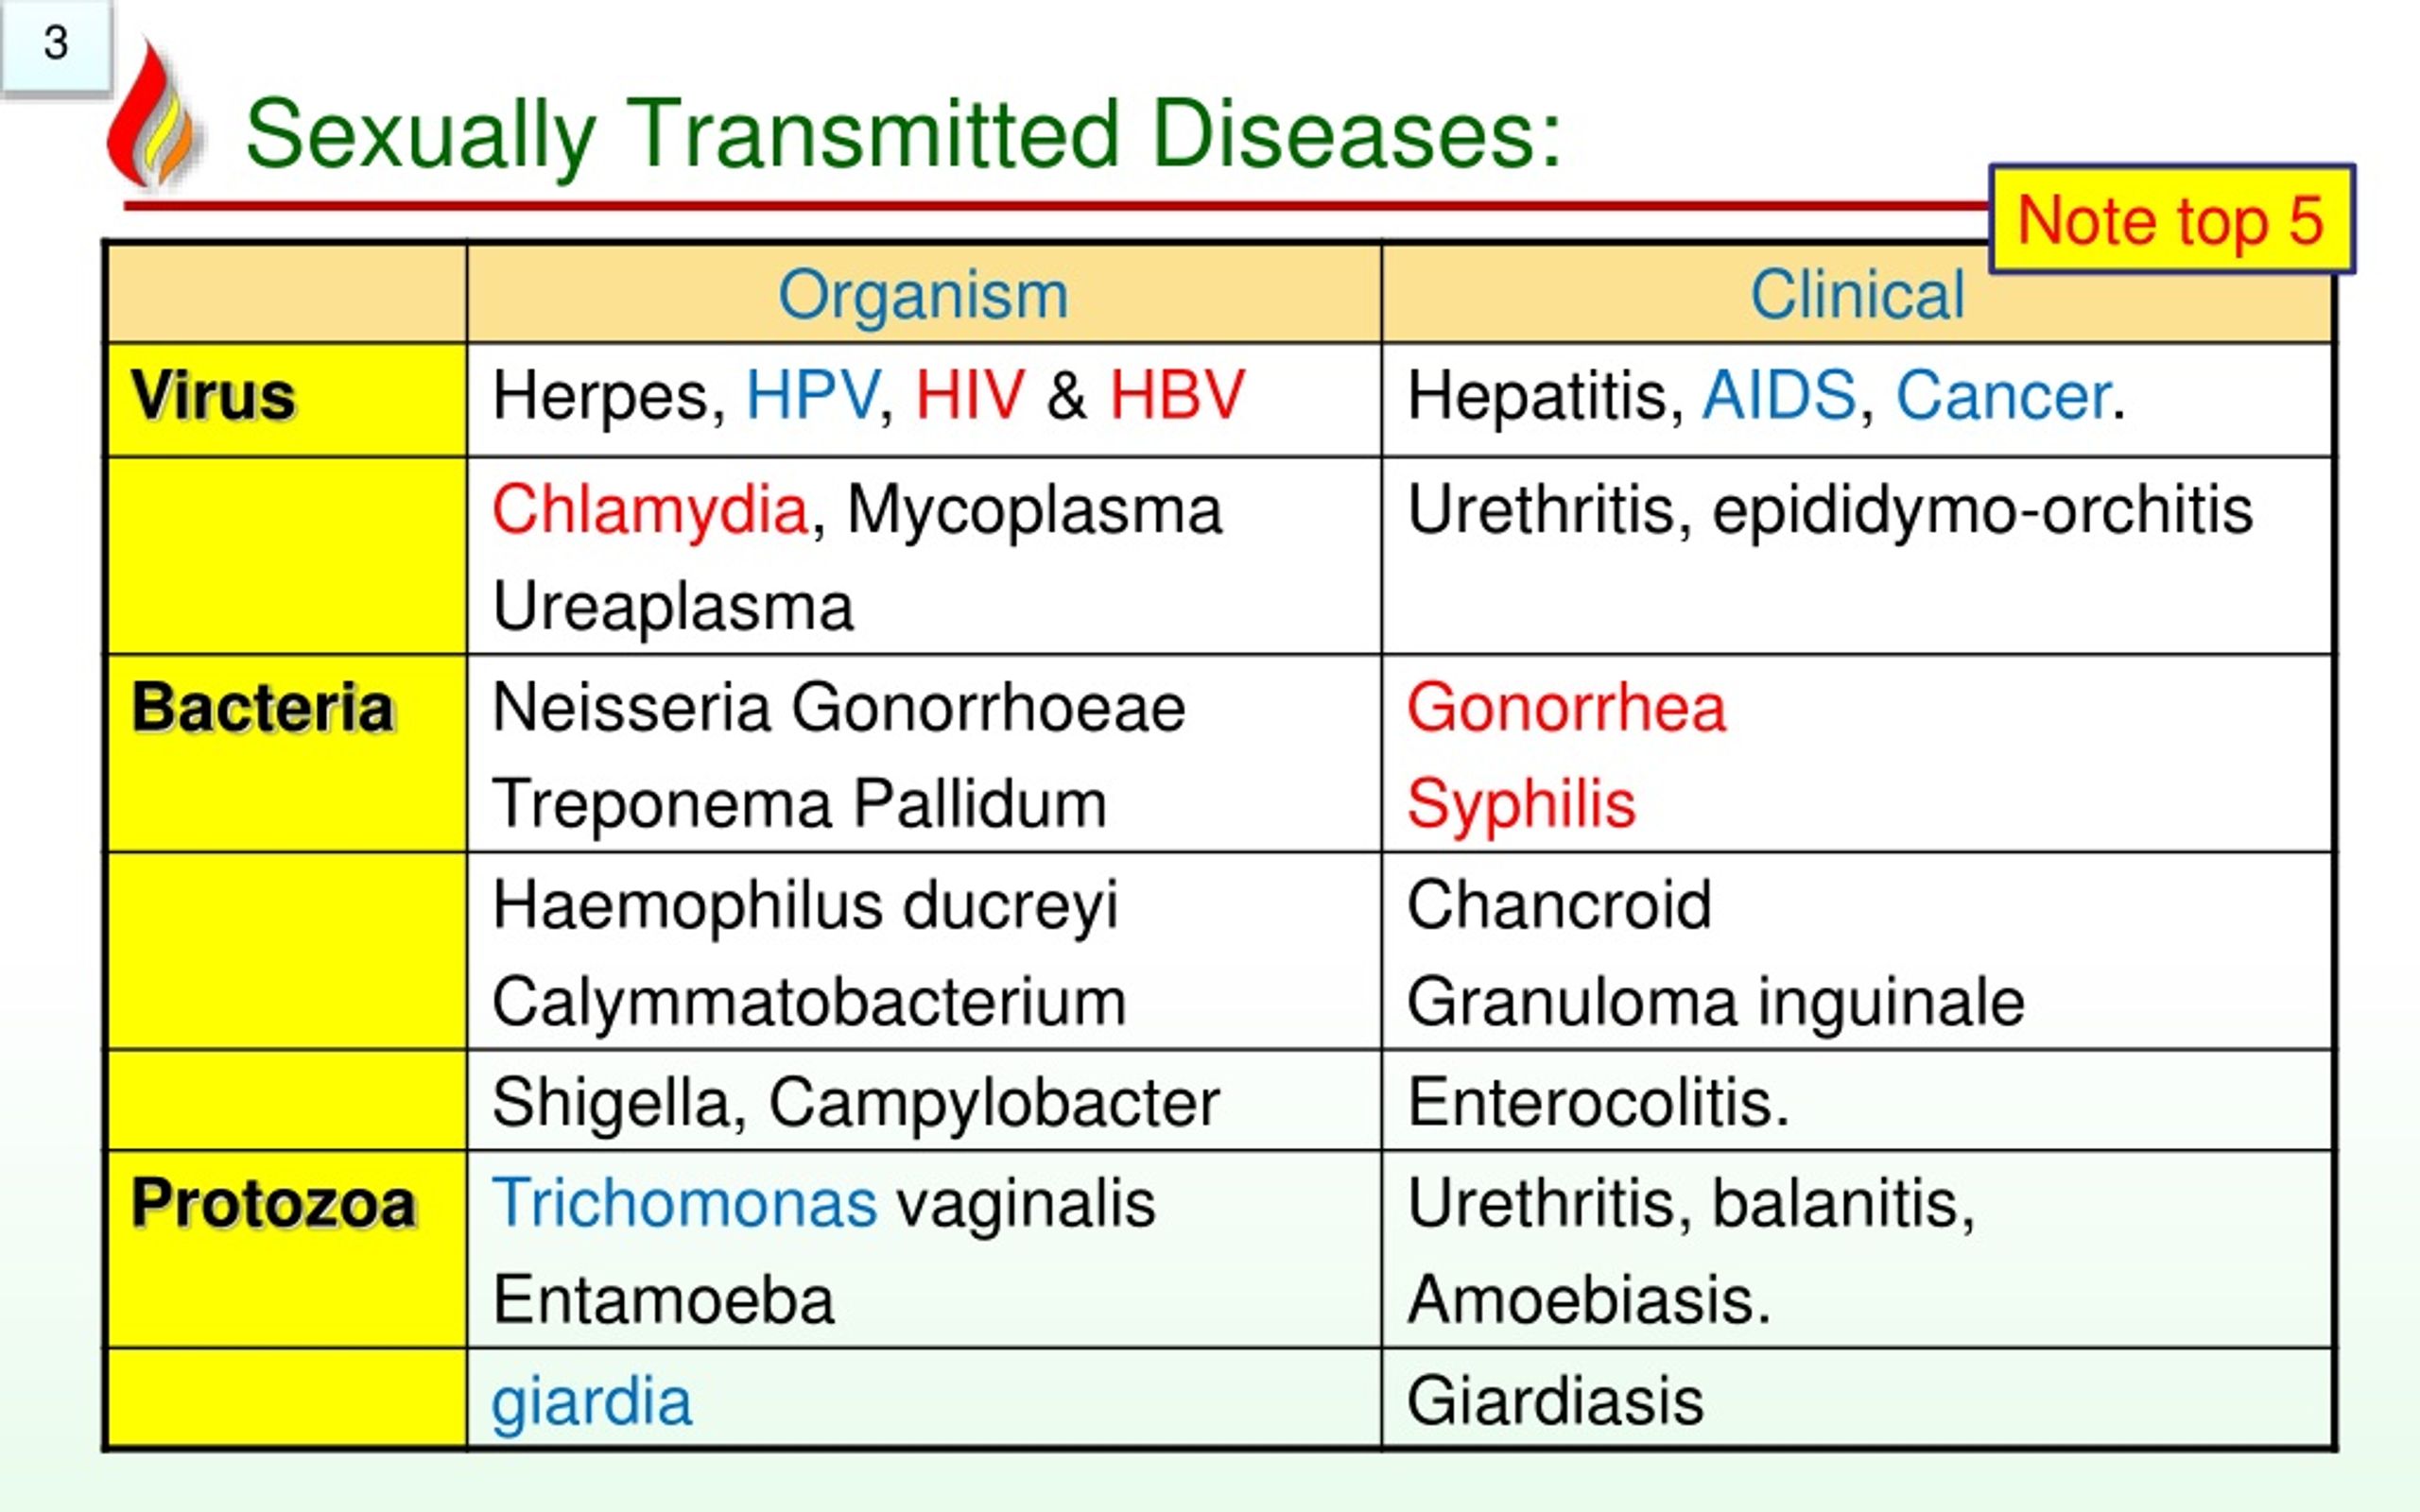 Ppt Pathology Of Std Sexually Transmitted Disorders Powerpoint Presentation Id8201959